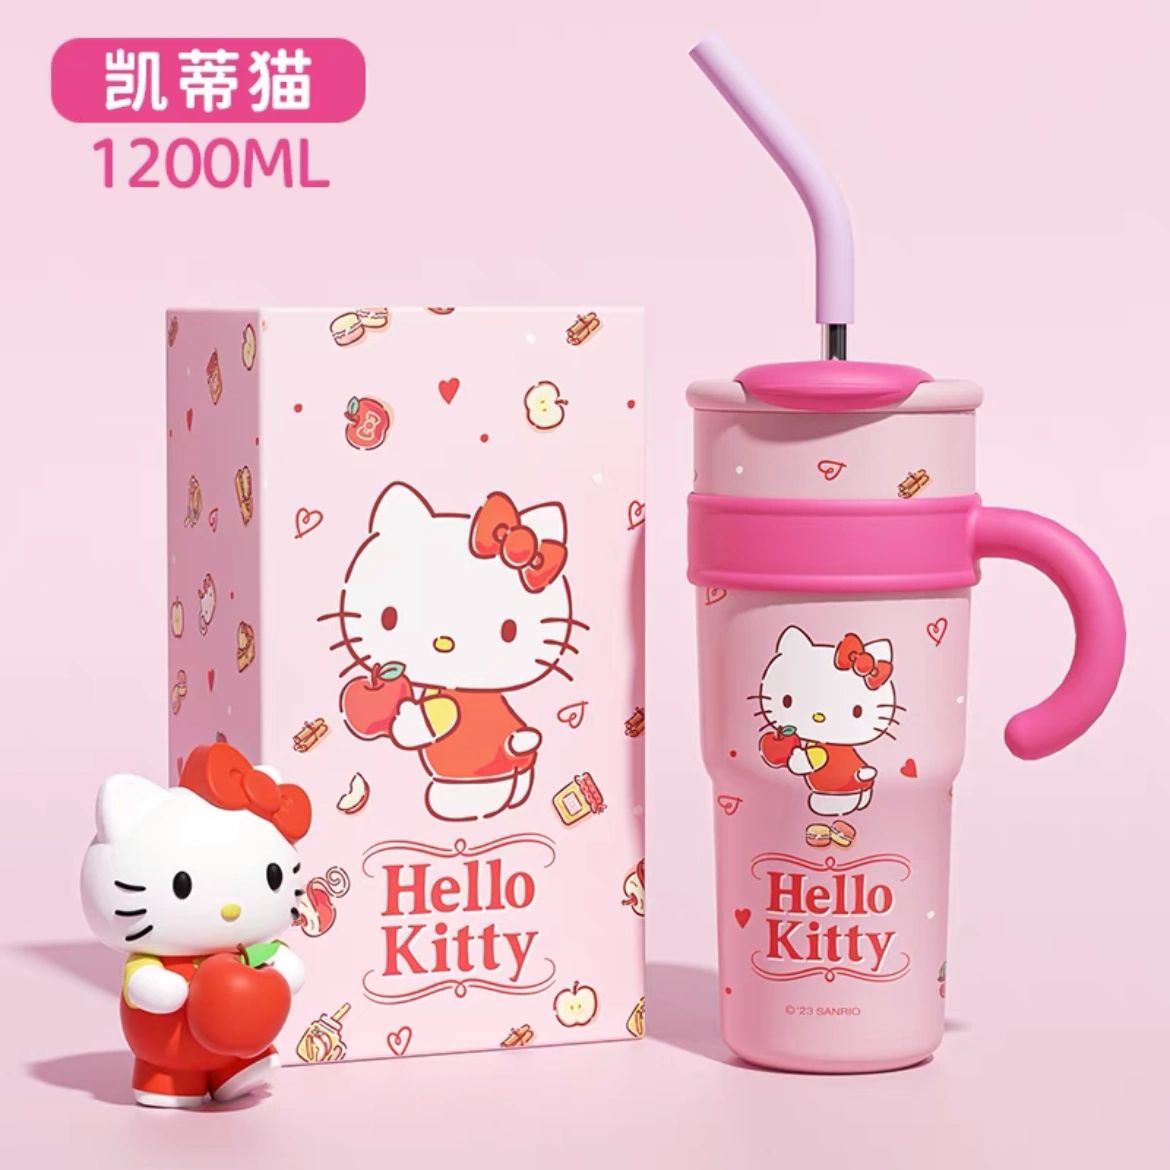 Sanrio Pink Strawberry Hello Kitty Stainless Steel Tumbler Cup Drink Straw  w/ Jacket 3PC Set 30 Oz Vacuum Insulated Inspired by You.